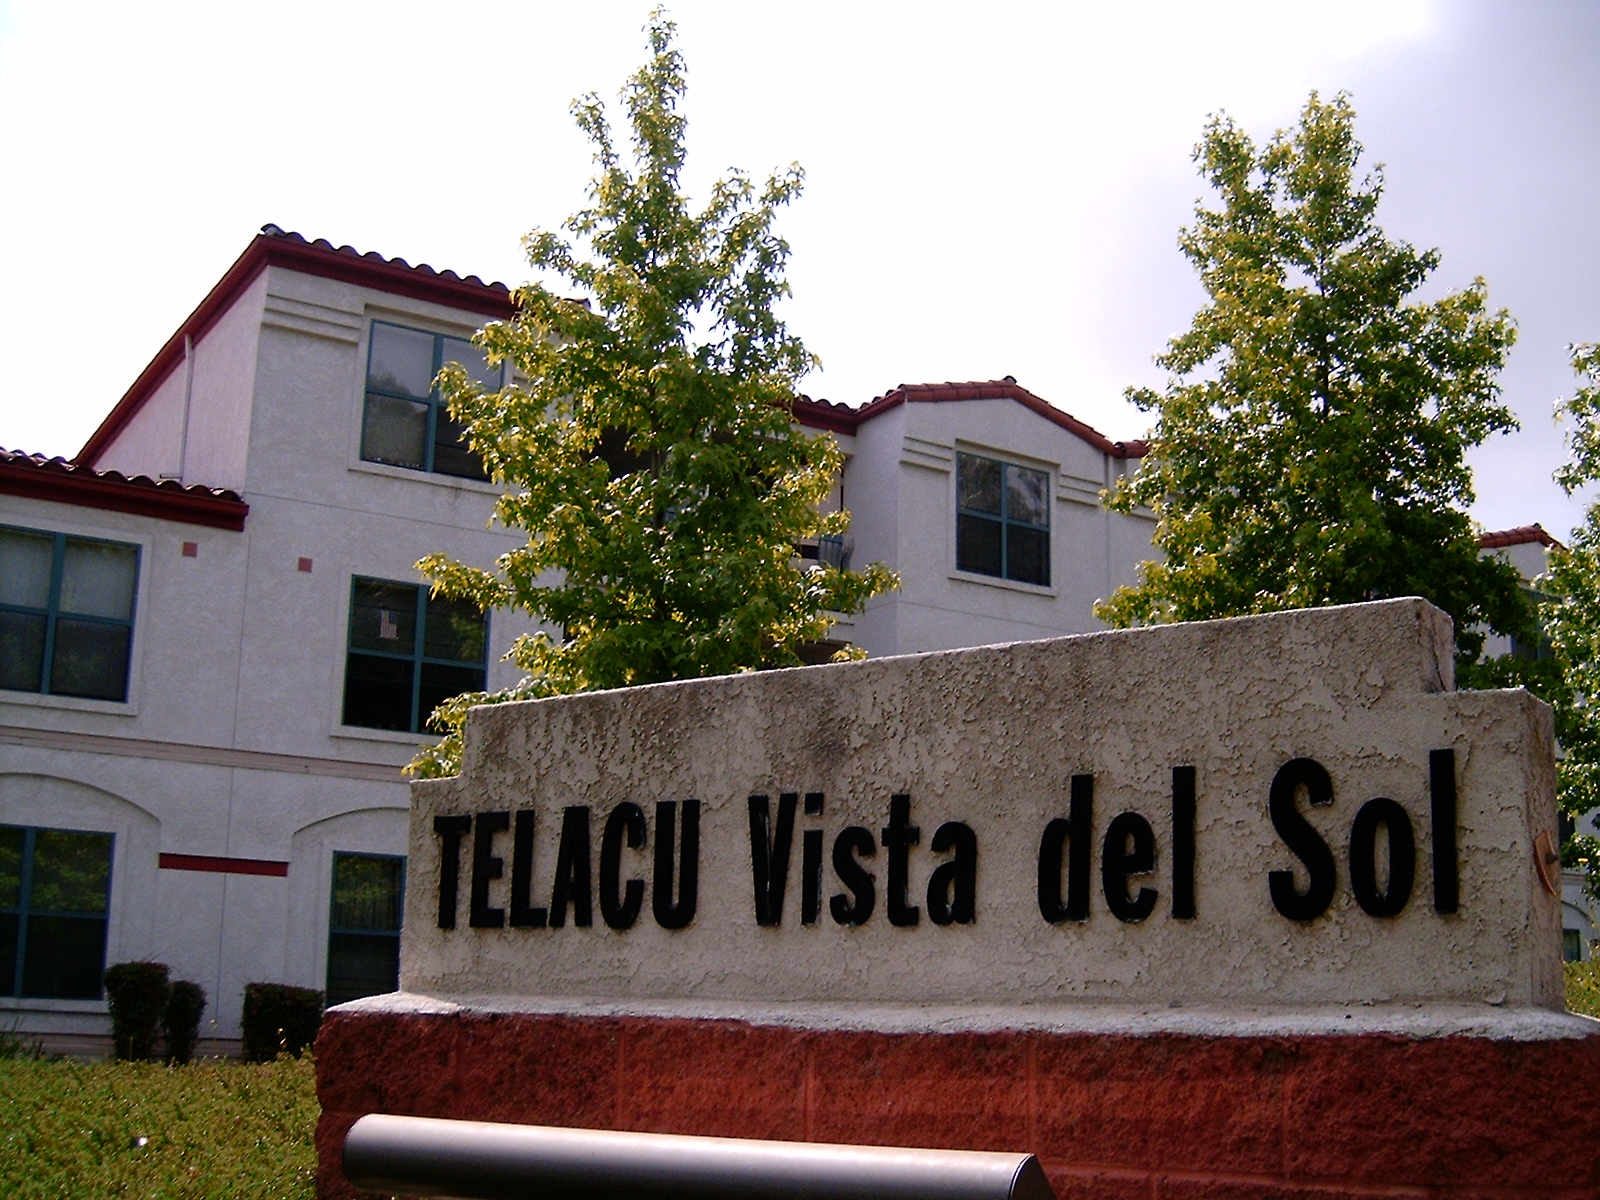 Close view of building sign of Telacu vista del sol with 
building in the background